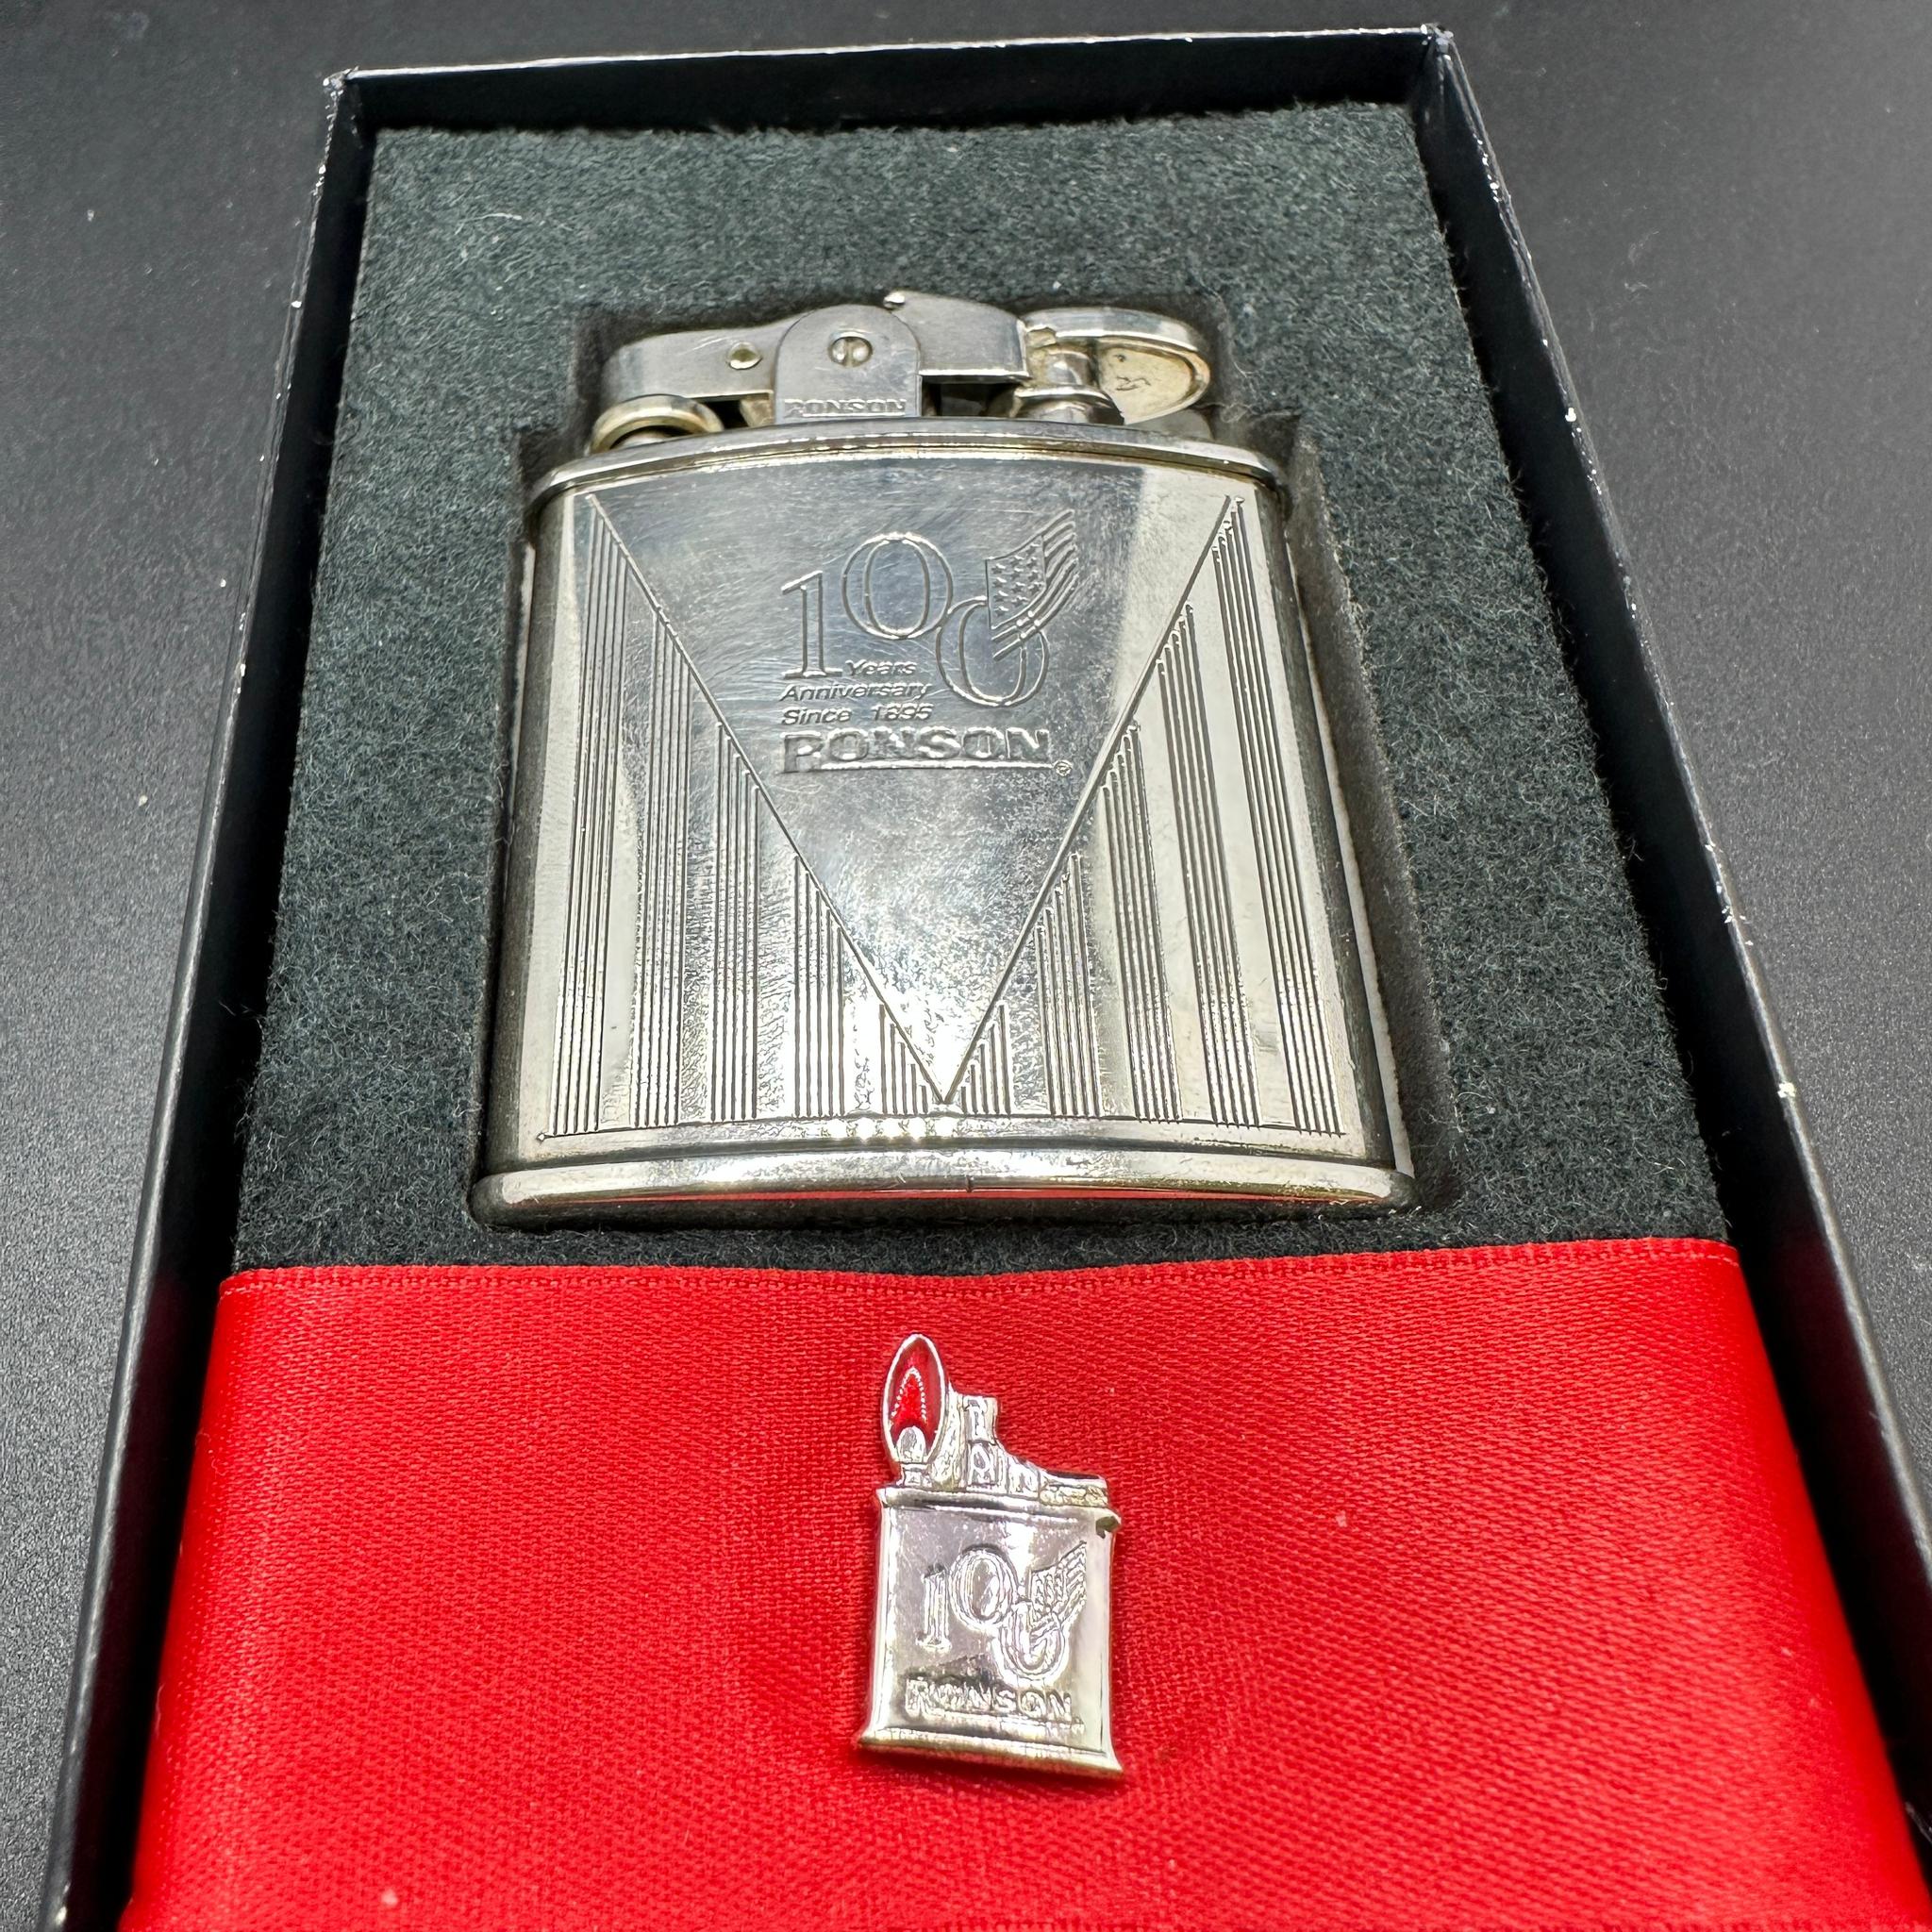 Ronson “1943” Limited Edition 100 Year Anniversary Silver Plated Vintage Lighter 1